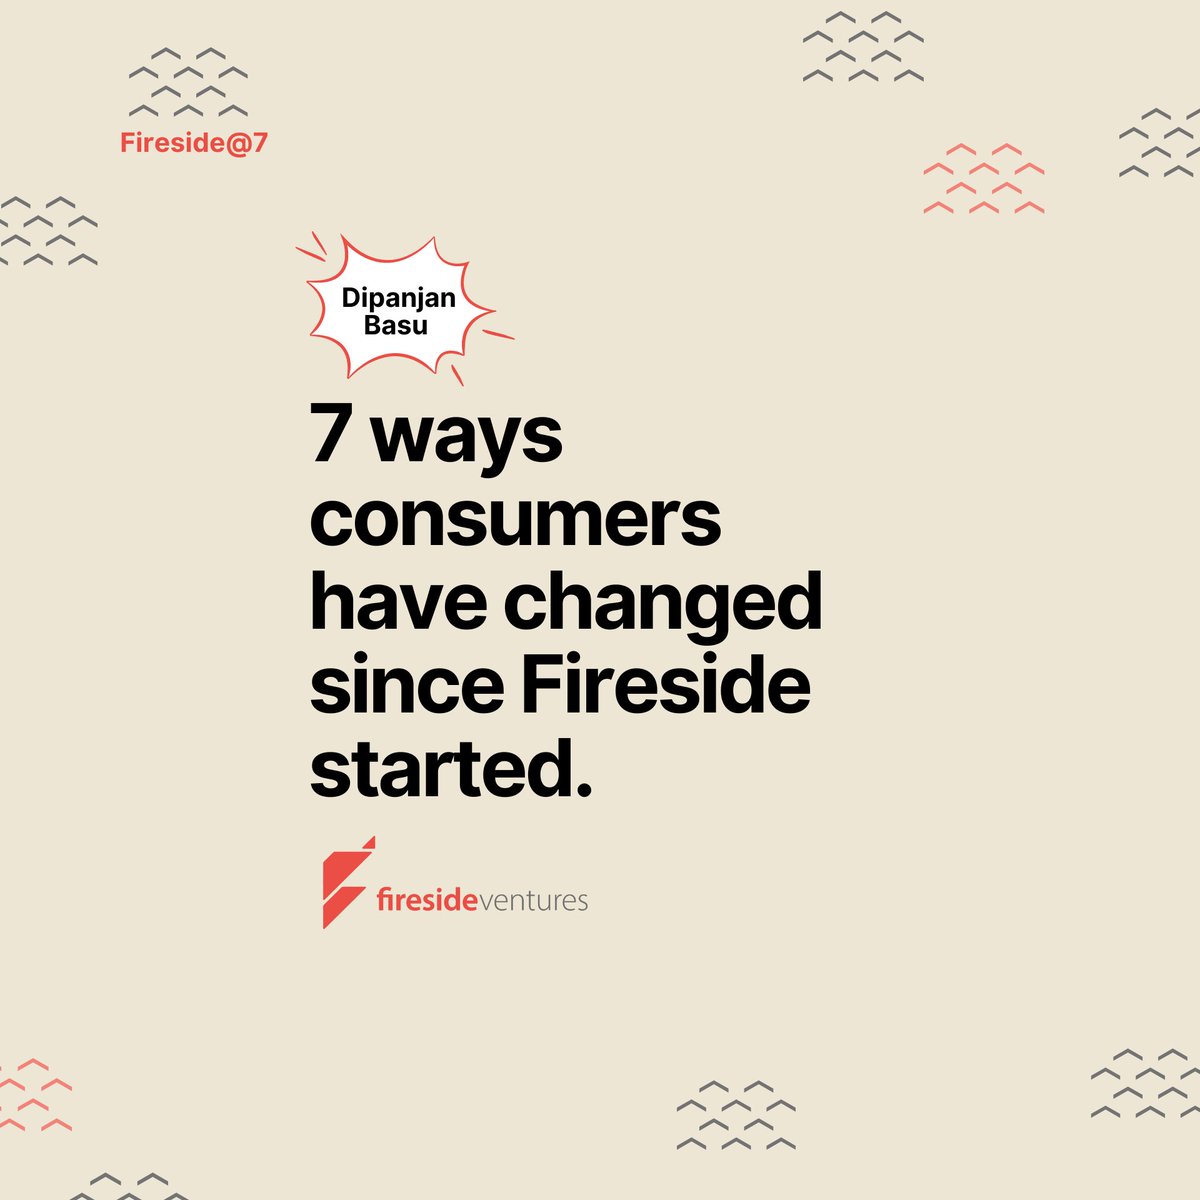 Now that we've spent a full 7 years helping build consumer brands, here are 7 ways that consumers have changed since we started, by @basu1_d 
🎂🎉🎈
#anniversary #7things #Firesideat7 #FiresideIgnite (1/9)